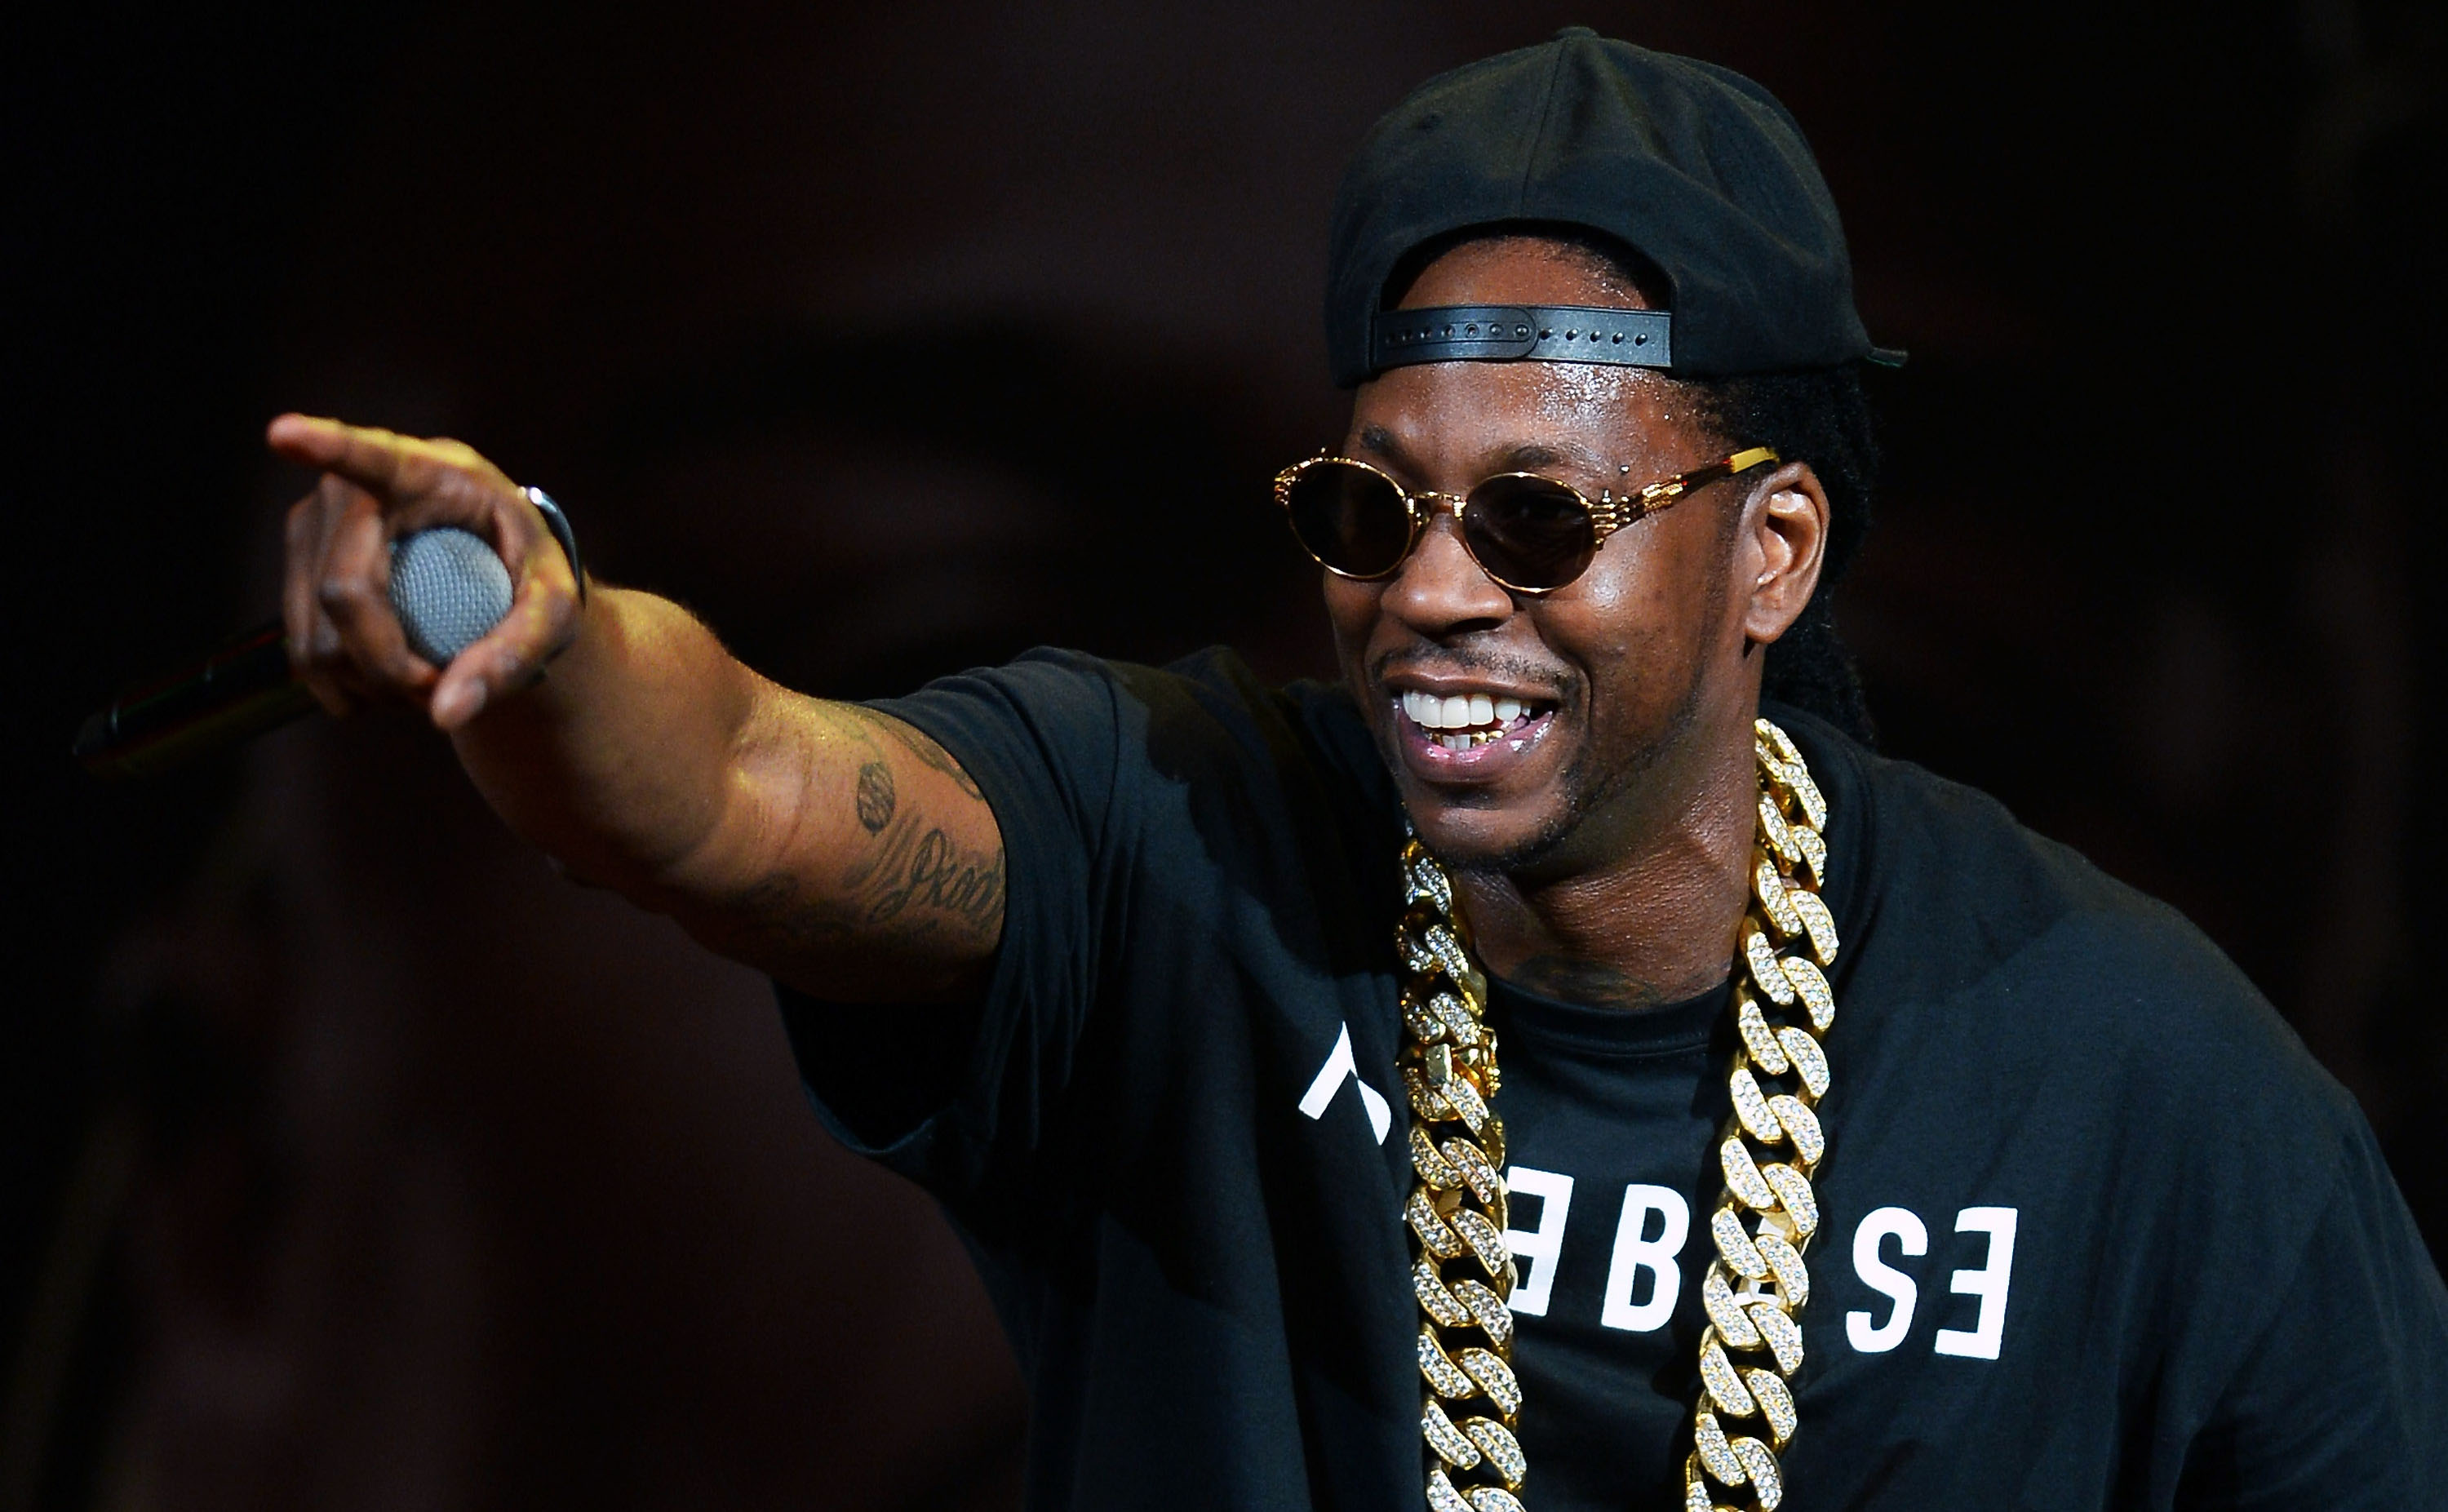 2 Chainz Gets Together with the Migos and Launches New Music Video